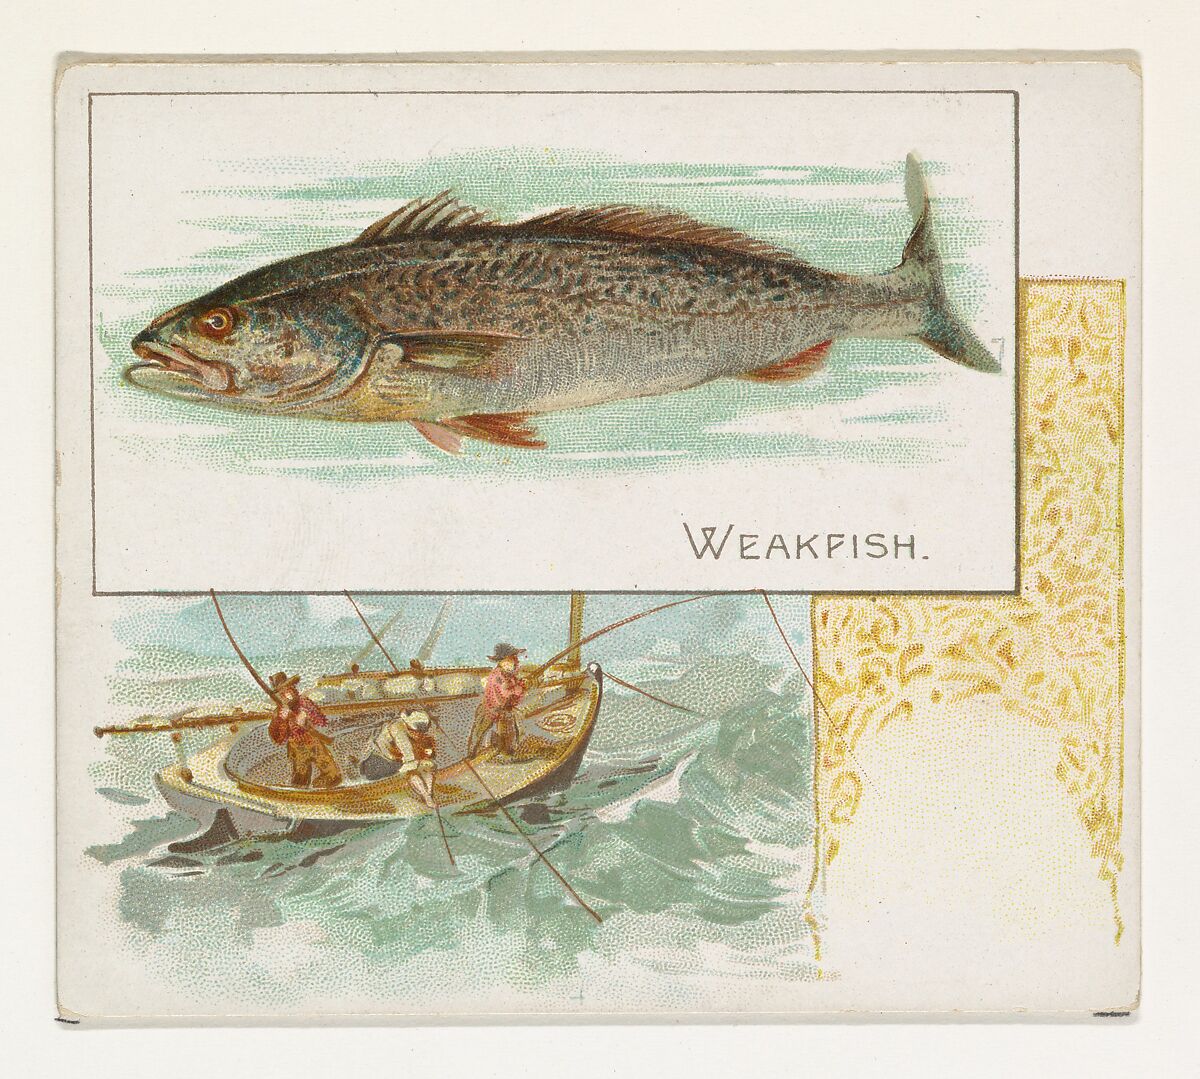 Weakfish, from Fish from American Waters series (N39) for Allen & Ginter Cigarettes, Issued by Allen &amp; Ginter (American, Richmond, Virginia), Commercial color lithograph 